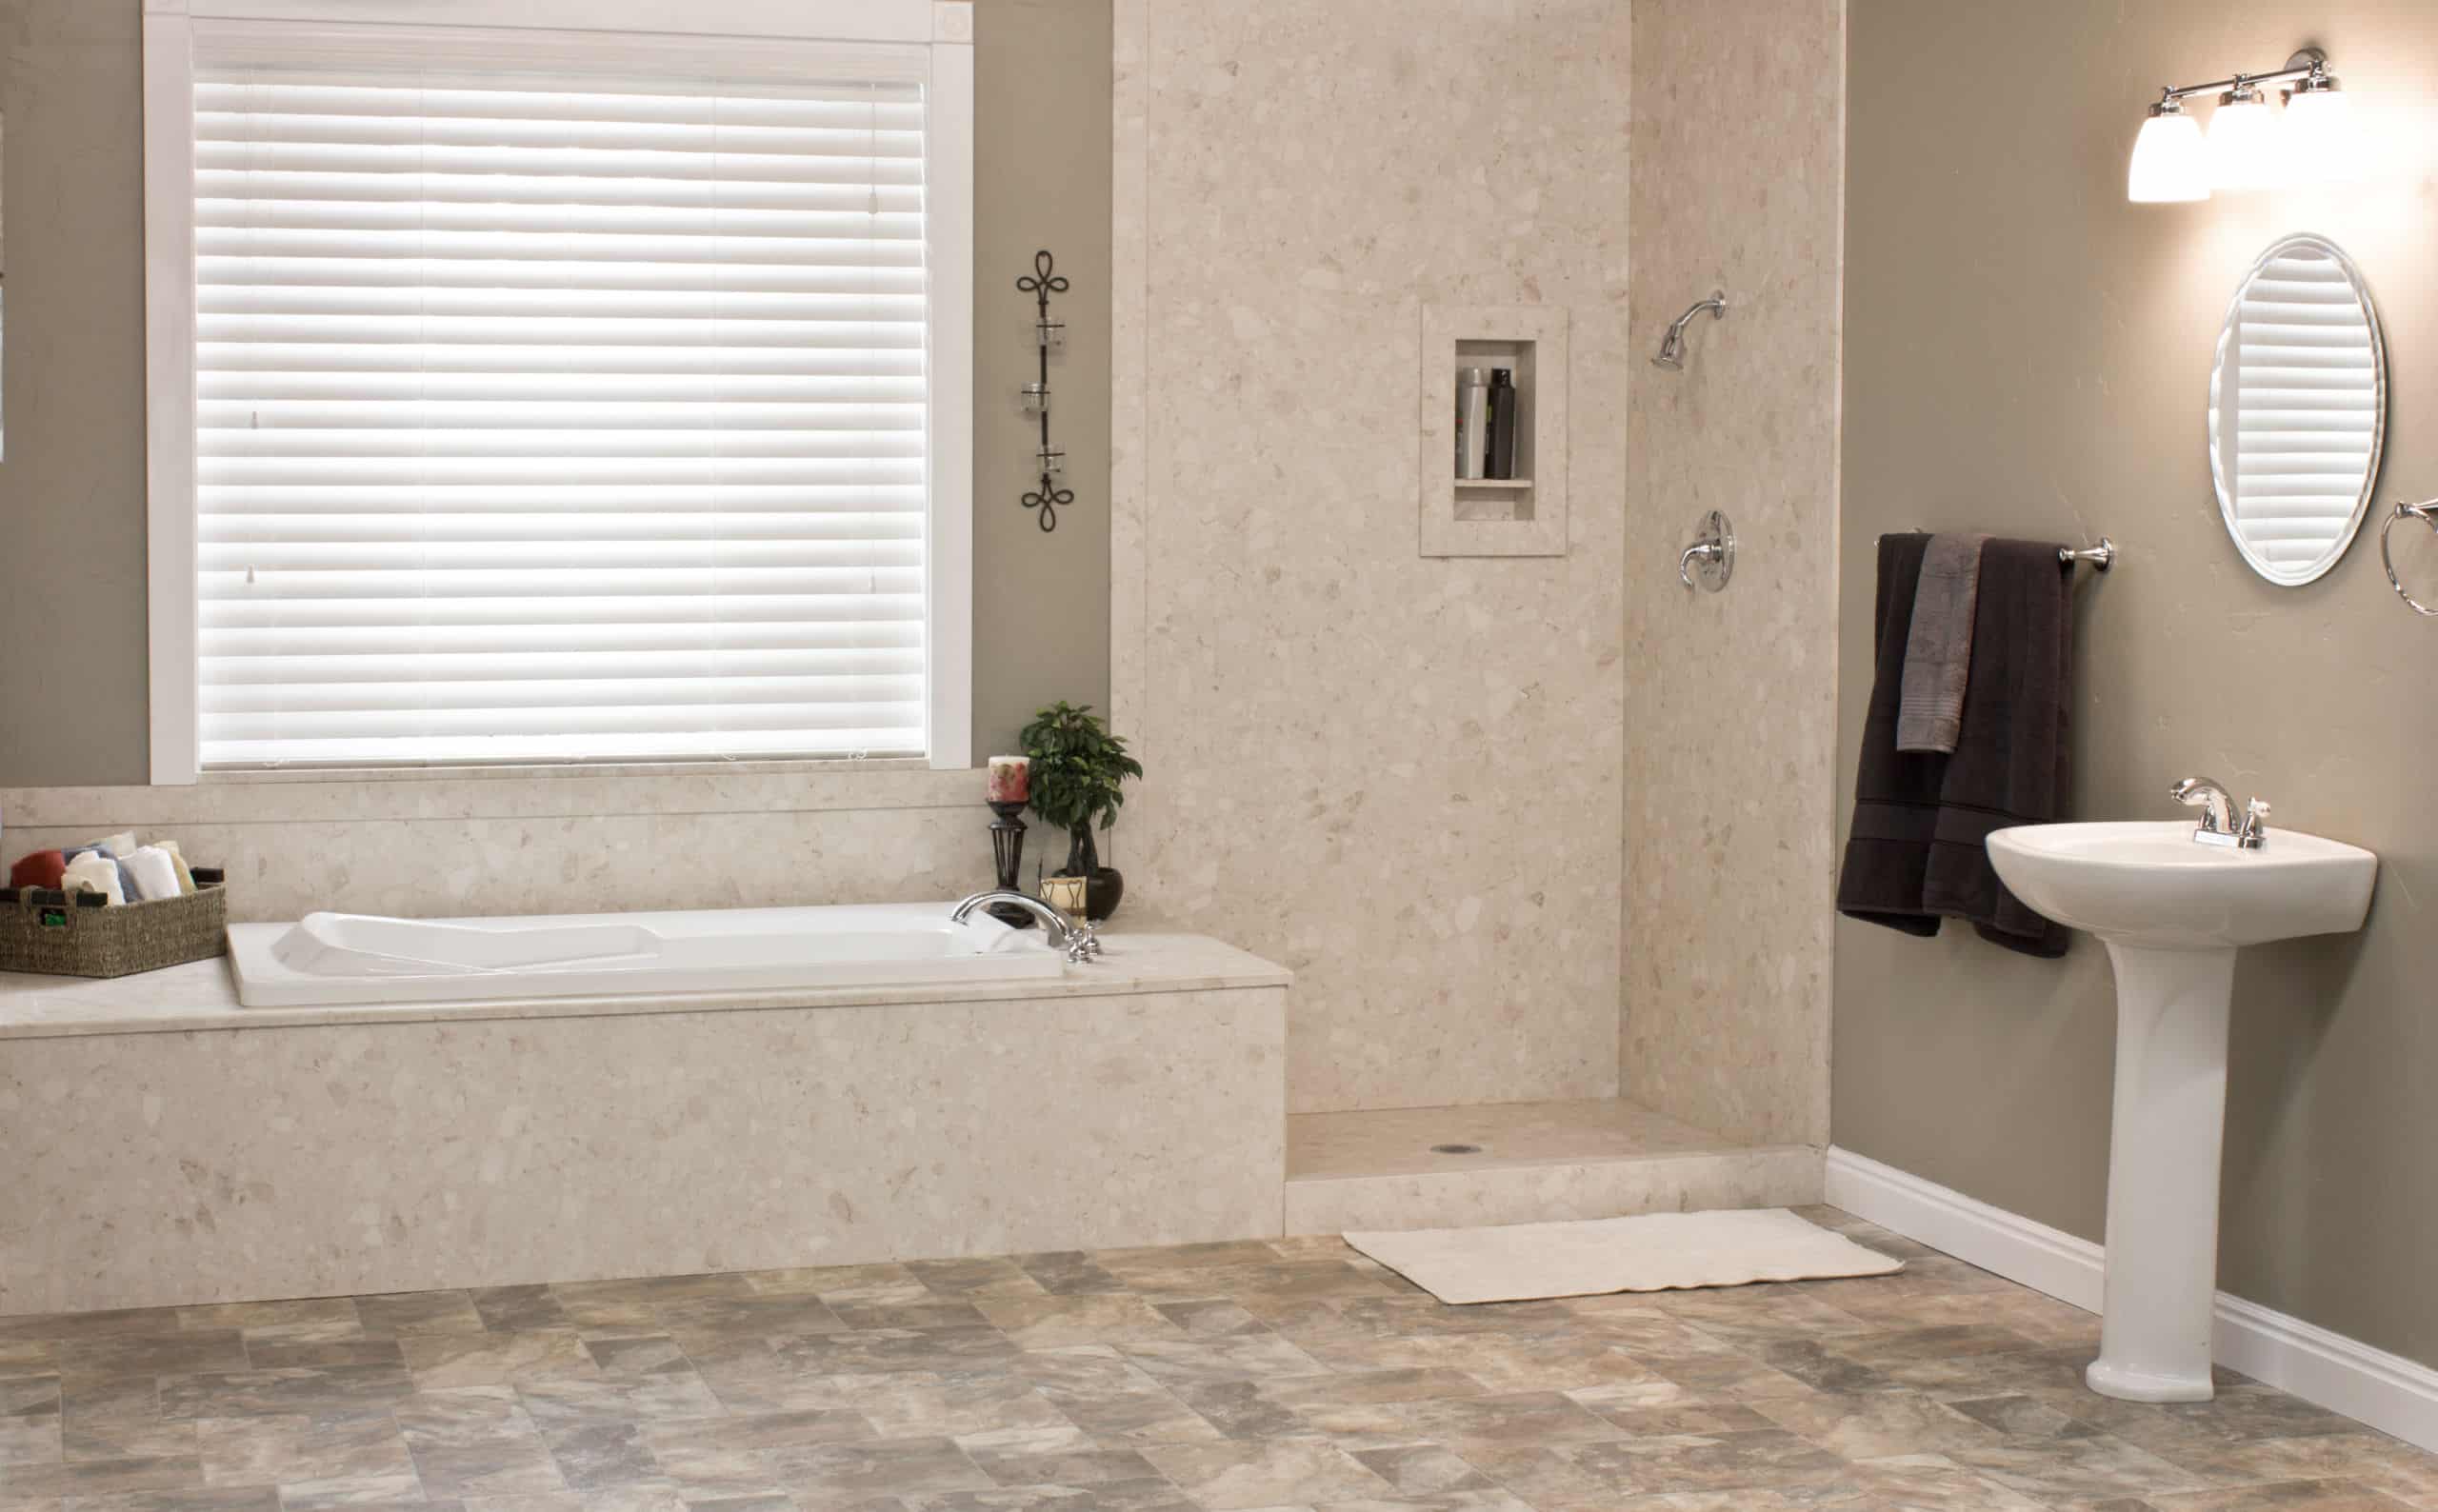 Calabria Full Shower Remodel. Faux stone bathroom design, creates a spa like atmosphere for bathrooms. A stone wall look without the price tag of reals stone.